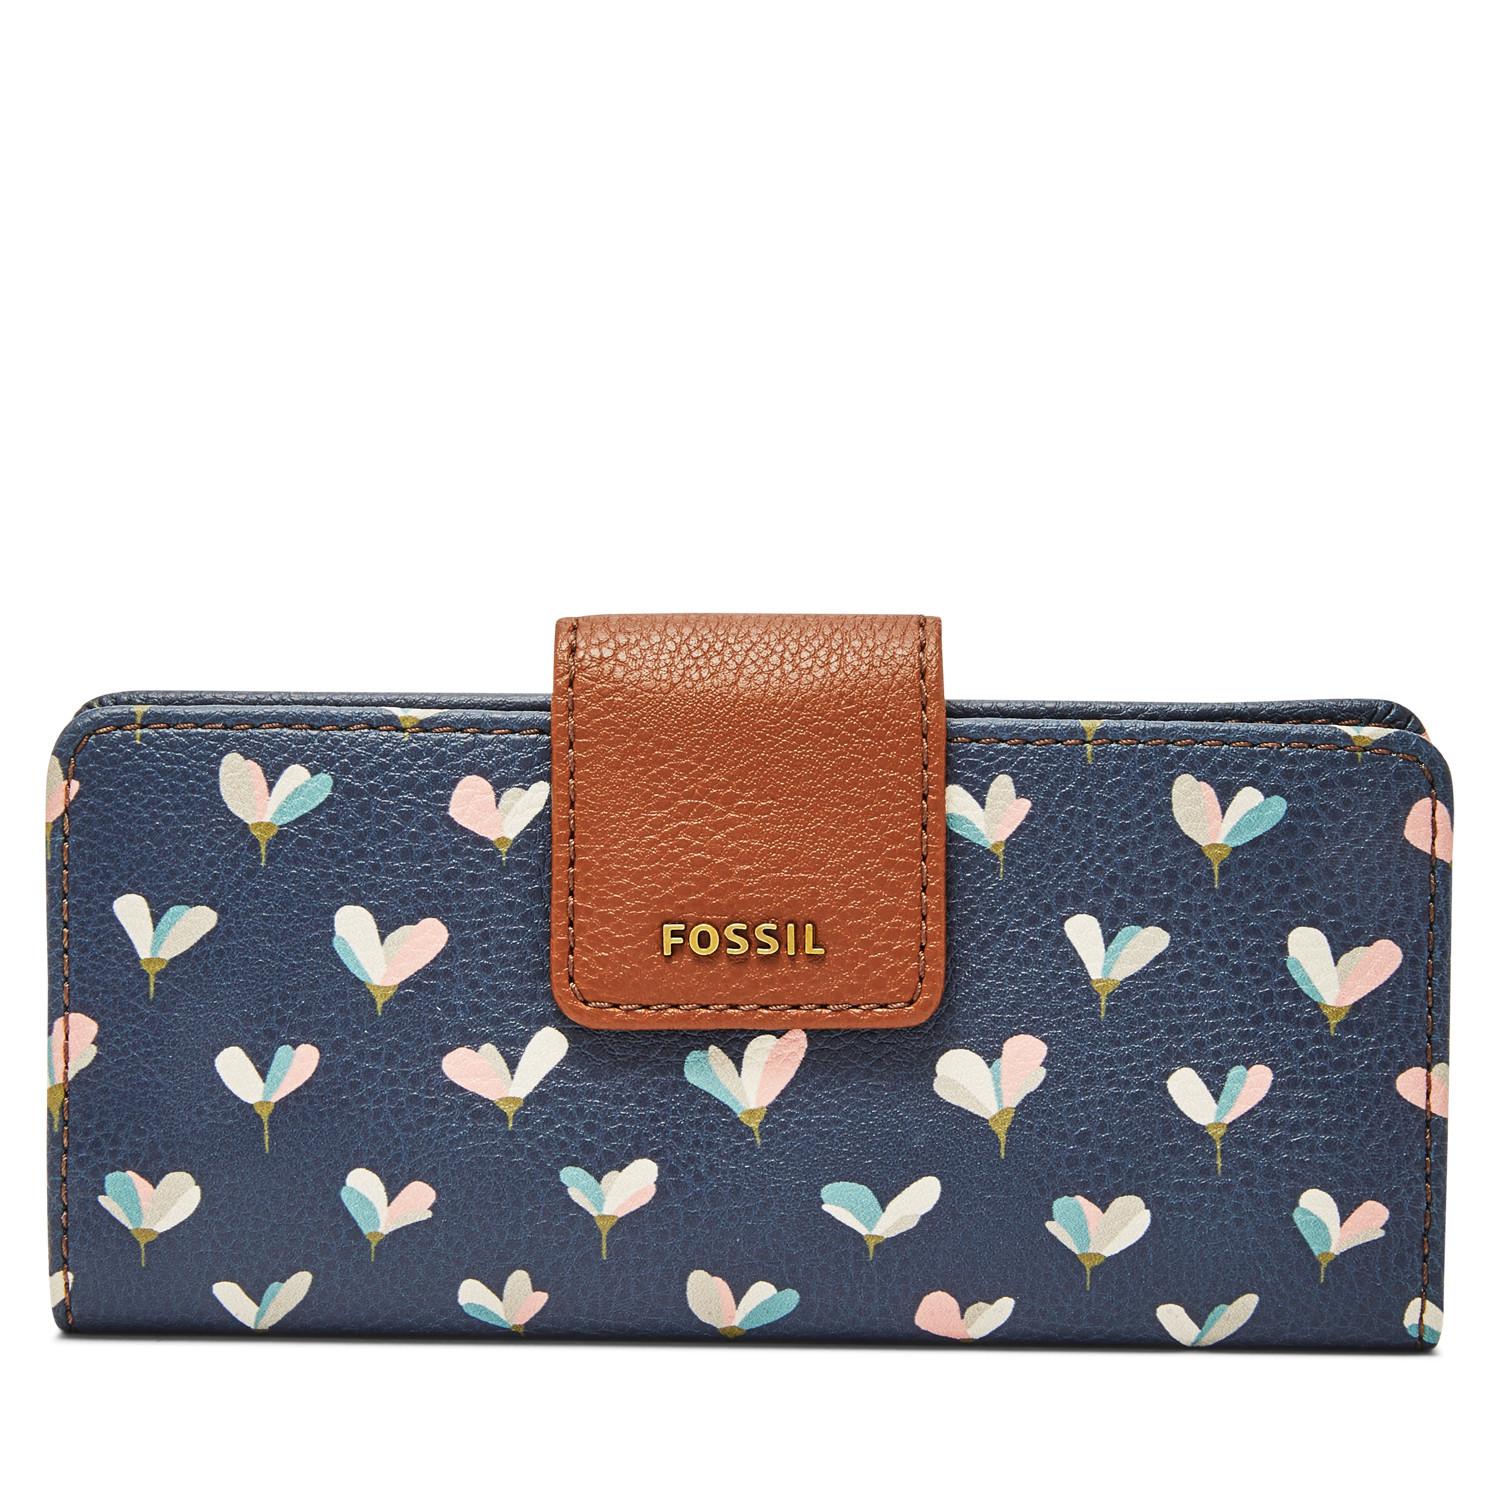 Fossil Madison Slim Clutch Wallet Floral - Lyst